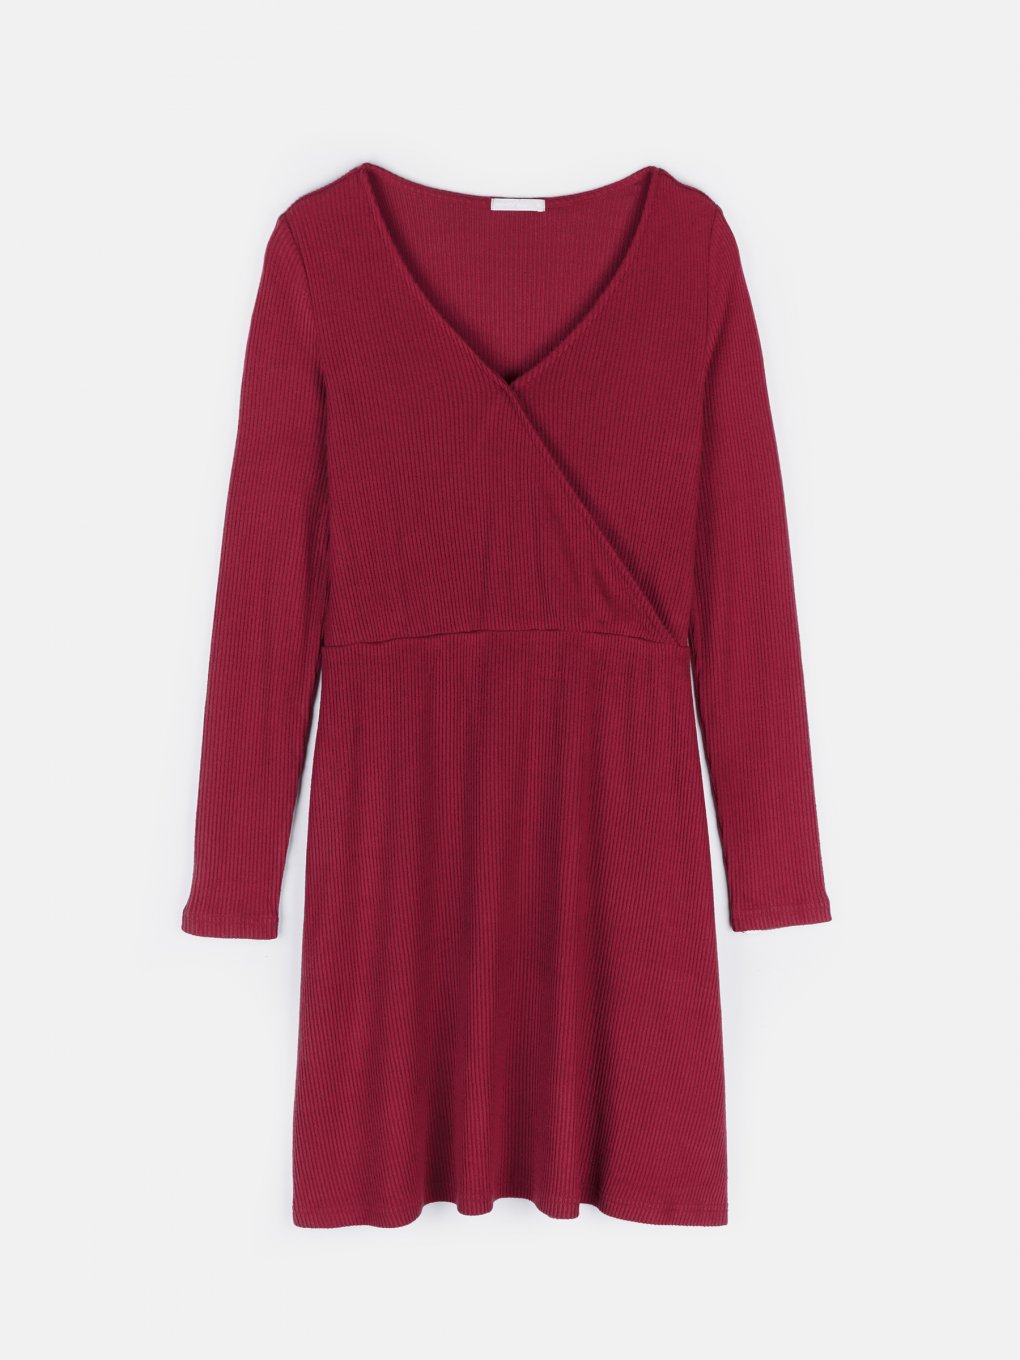 Ladies knitted a-line dress